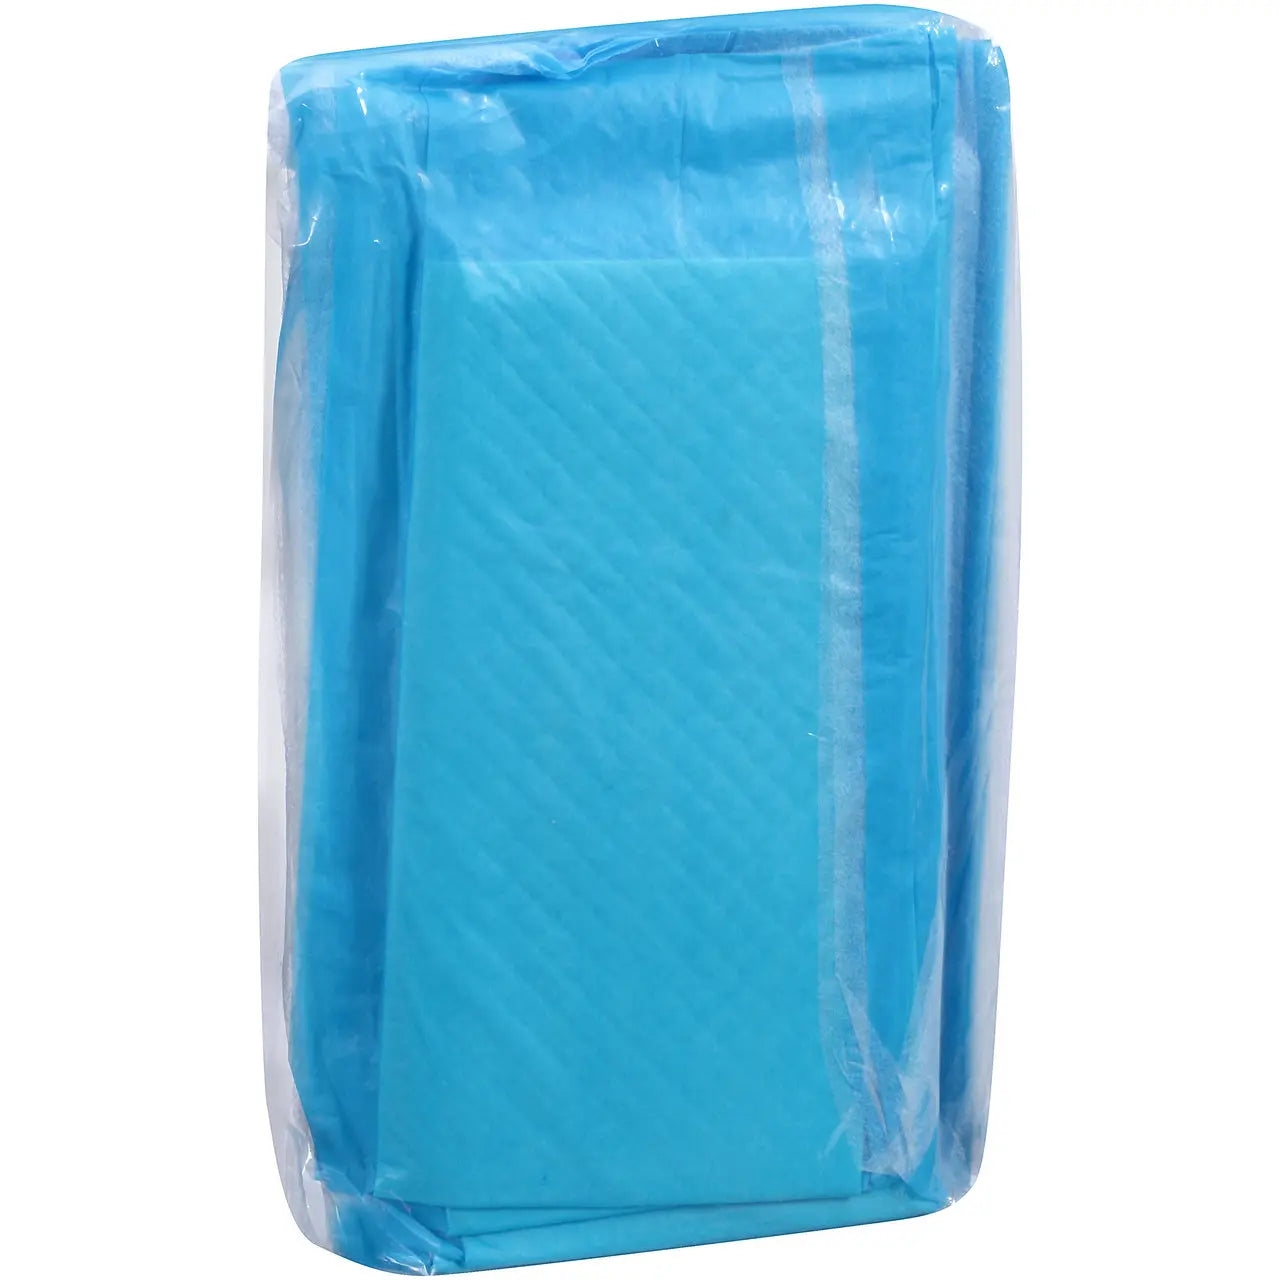 31928 - Attends Care Dri-Sorb Underpads, 30"X30" - 15 Bags Of 10= CASE - Home Health Store Inc